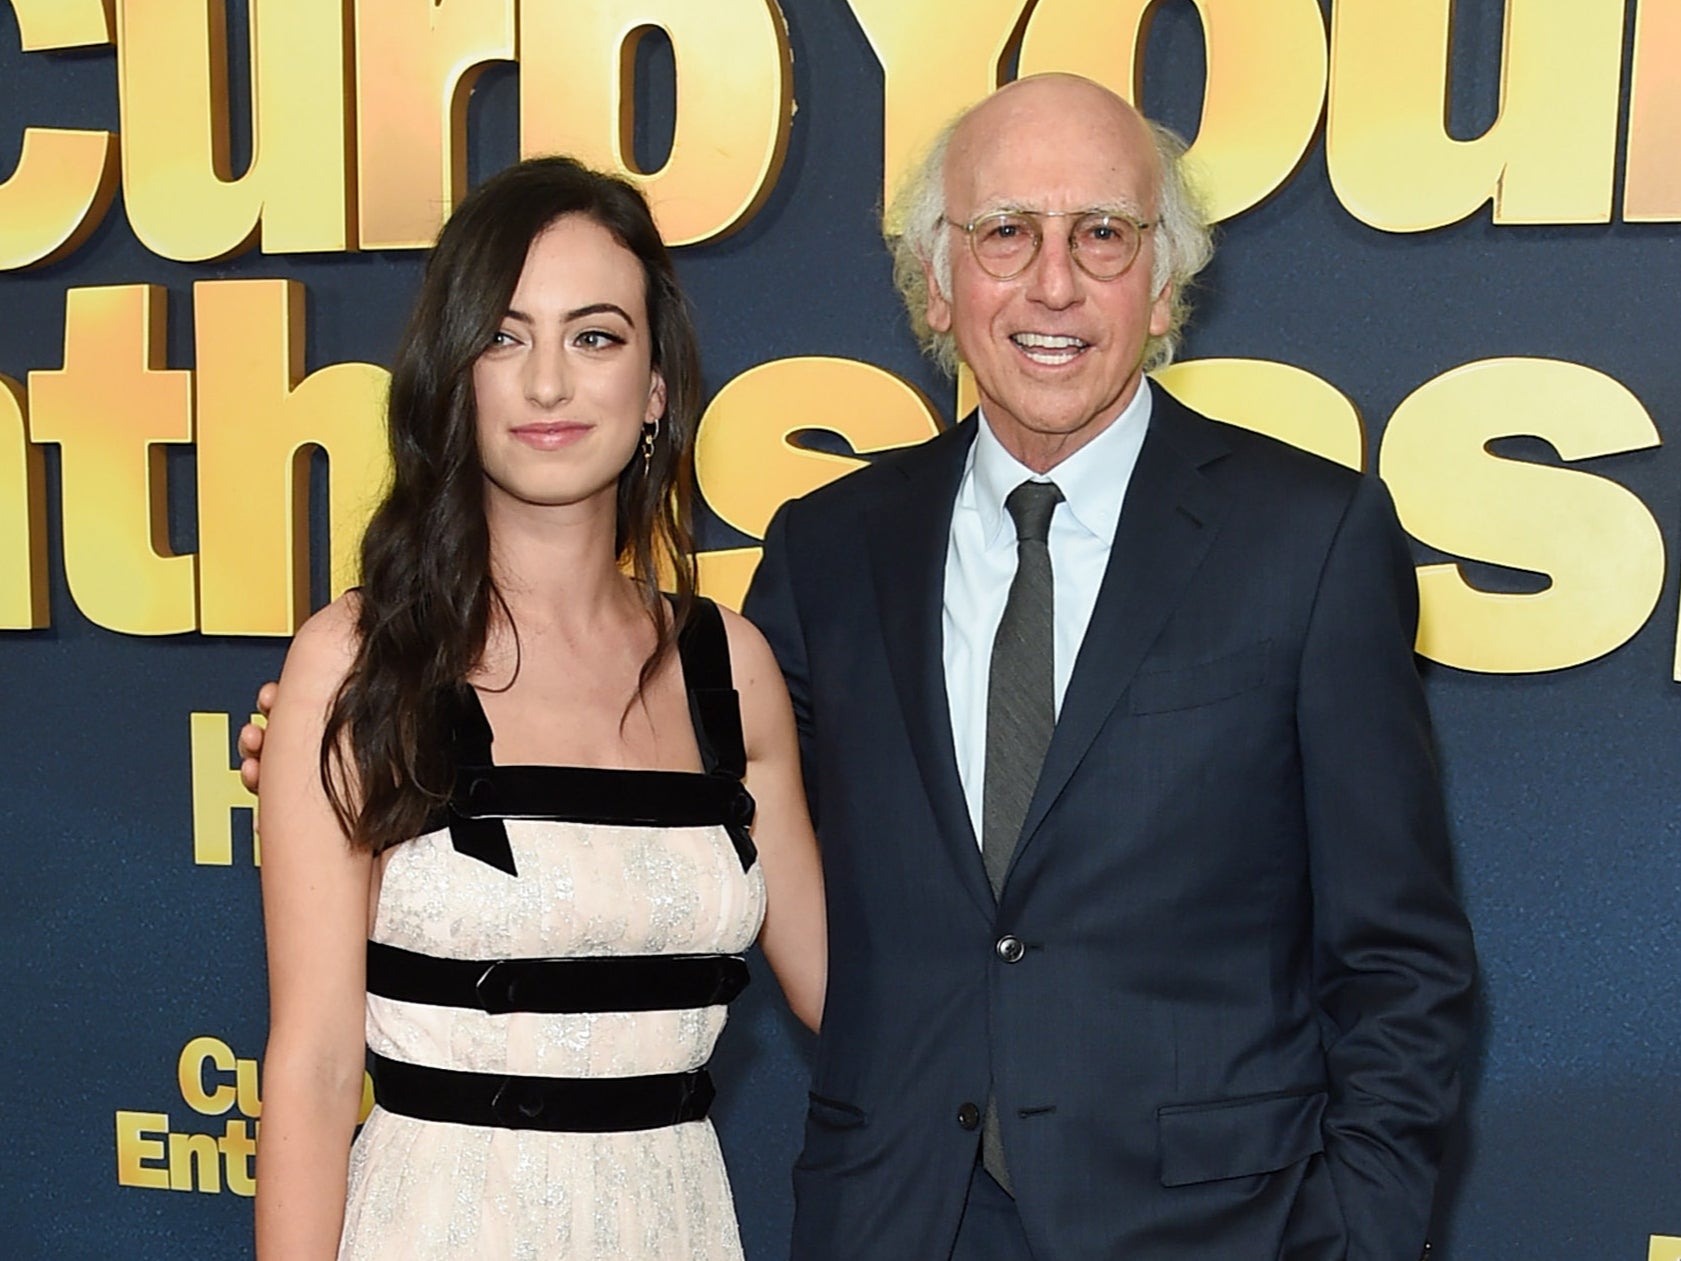 Larry David poses with his daughter Cazzie David at the ‘Curb Your Enthusiasm’ season nine premiere on 27 September 2017 in New York City